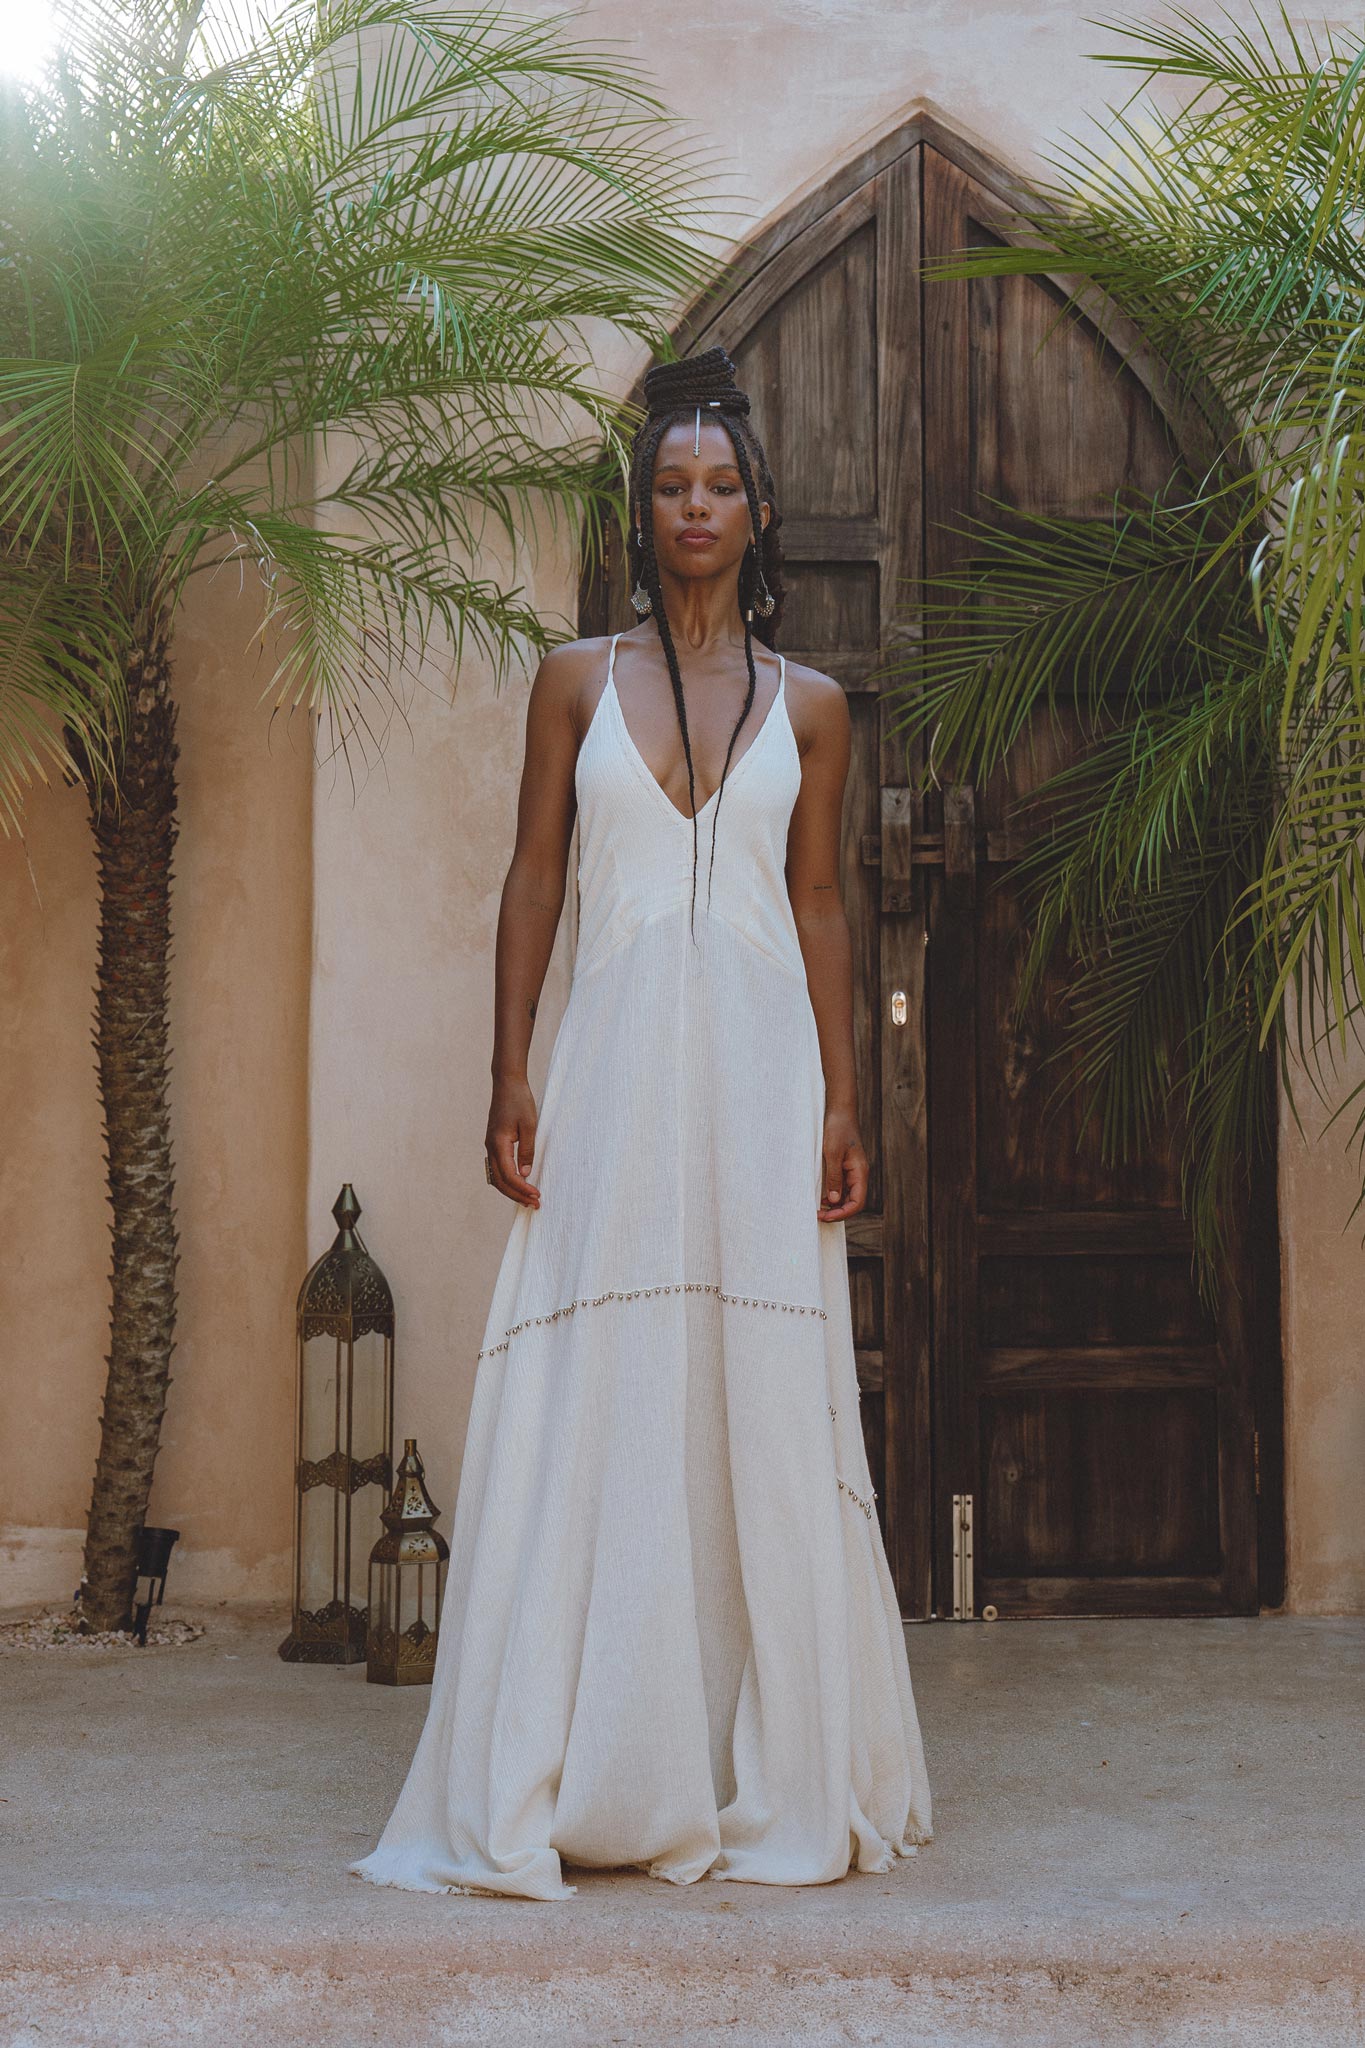 Get the Greek Goddess Look with Aya Sacred Wear's Off White Dress